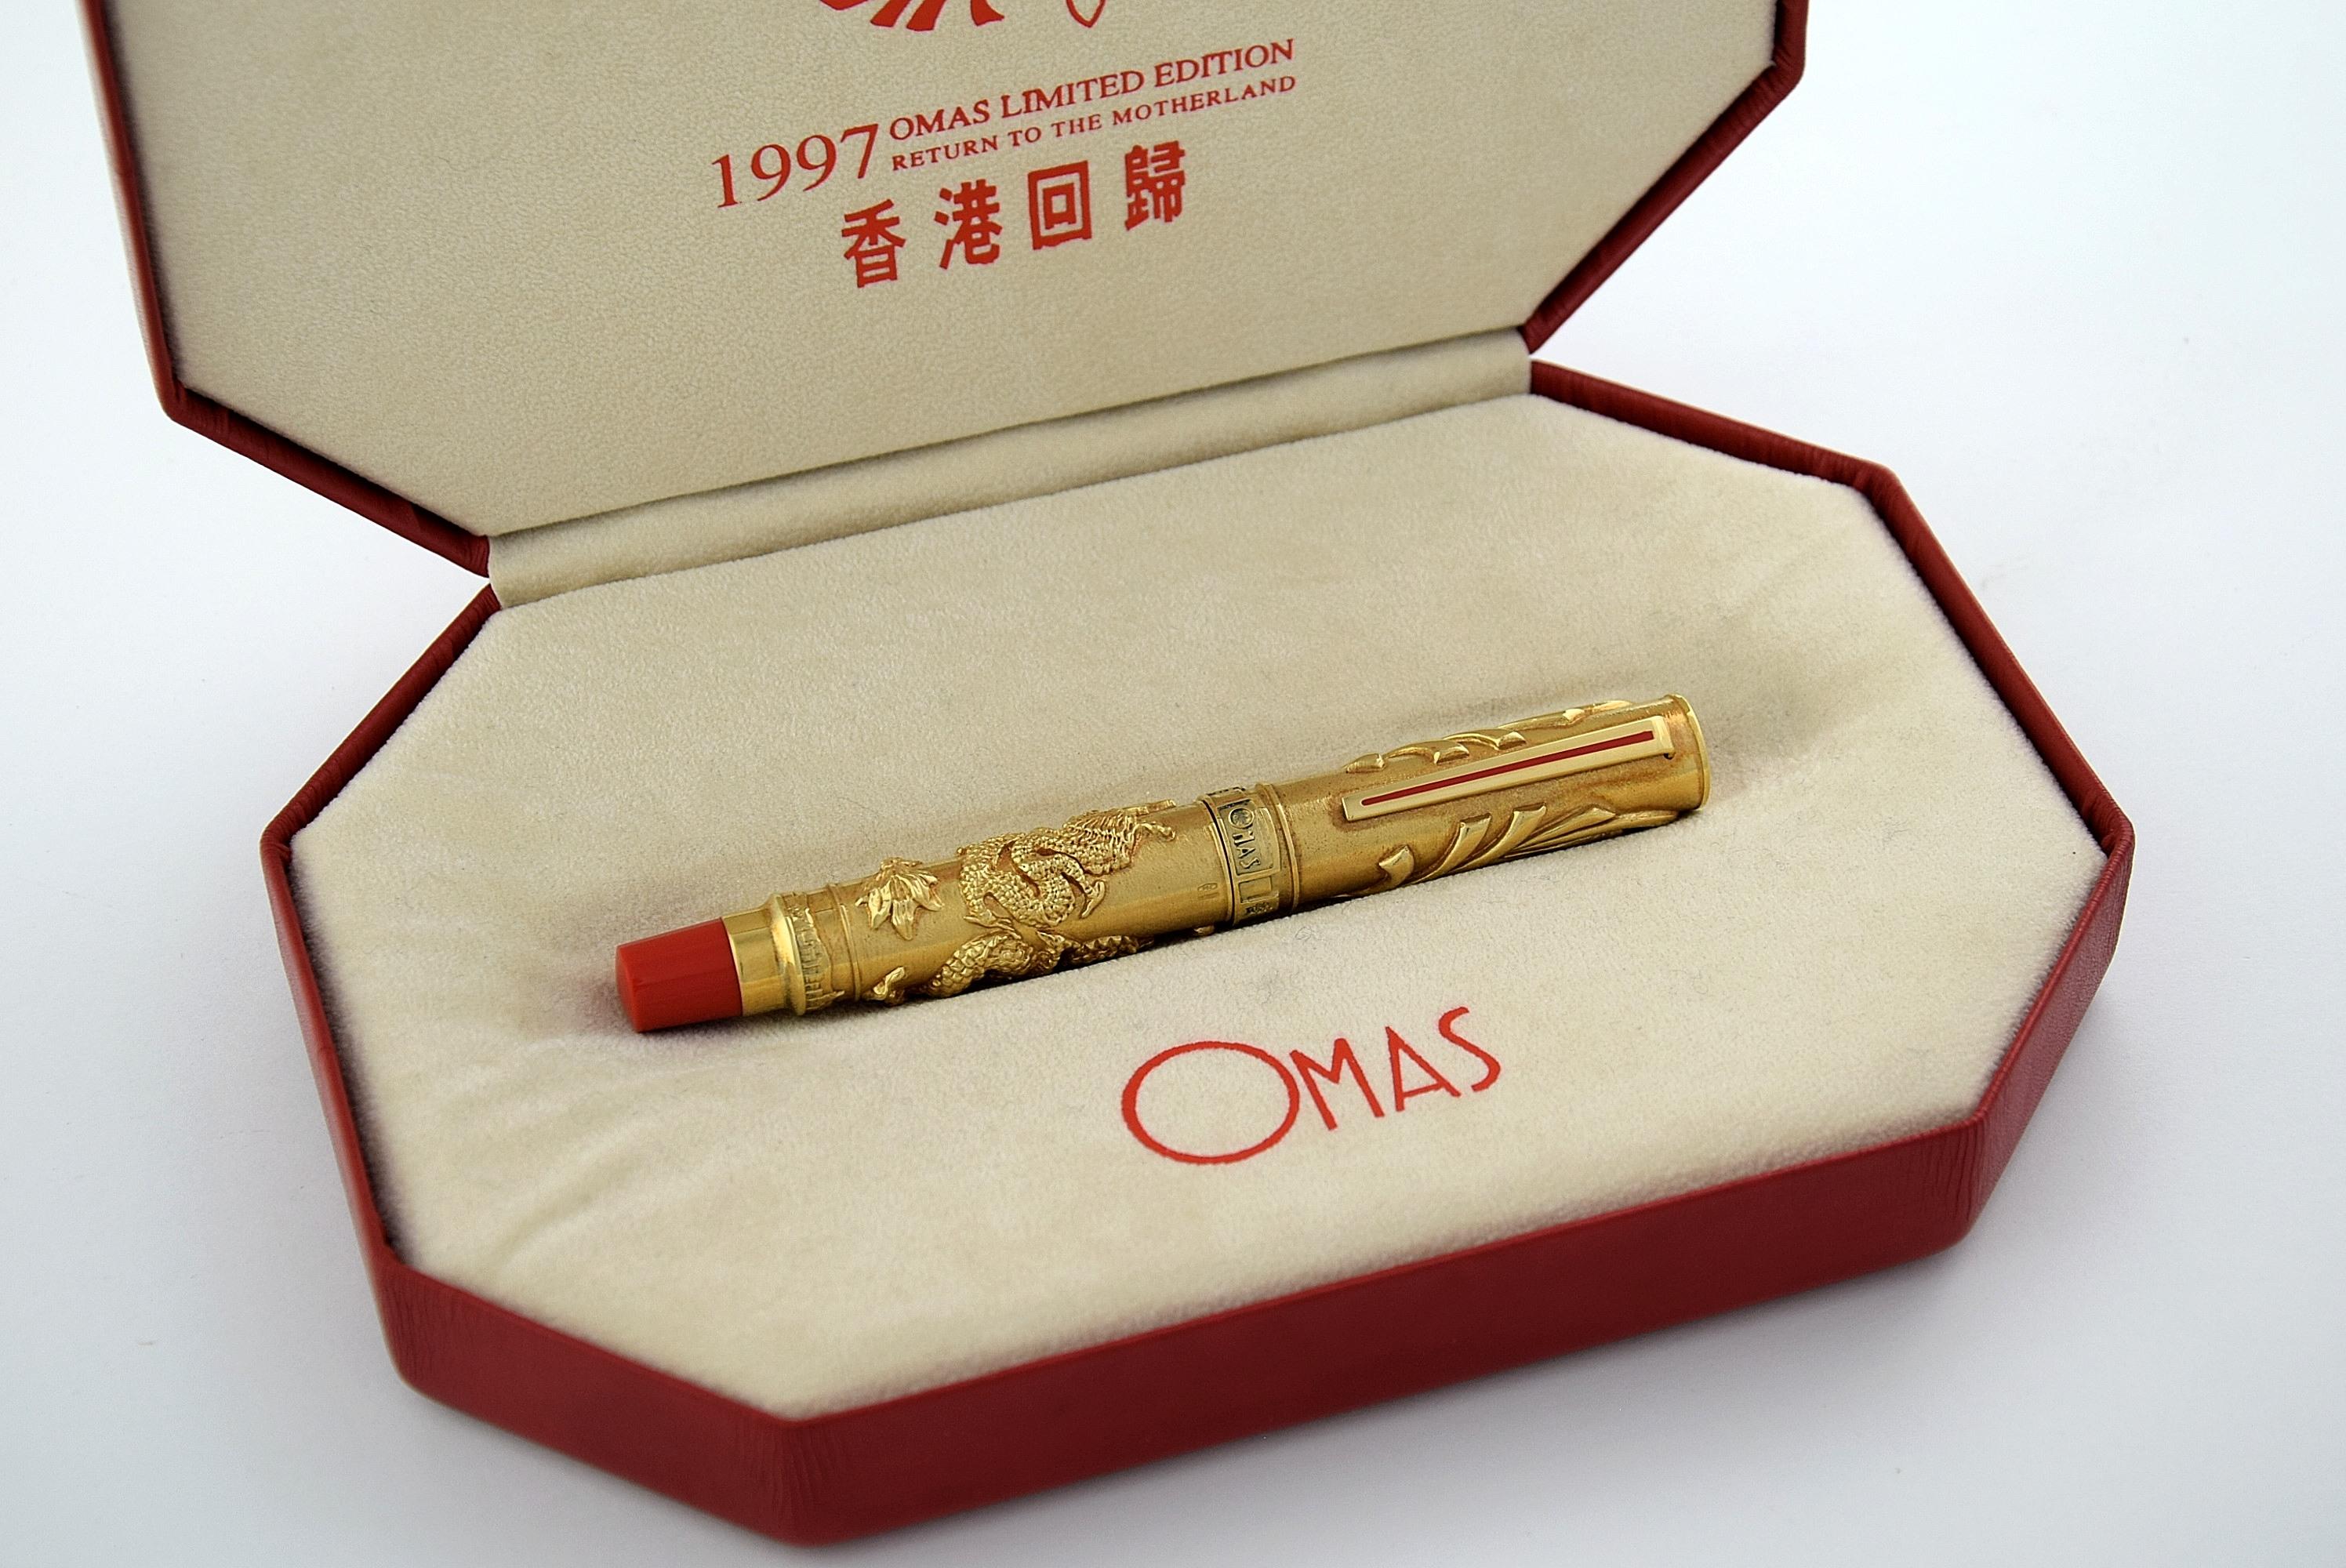 Omas 1997 18-Karat Gold Return to the Motherland Limited Edition Fountain Pen For Sale 12